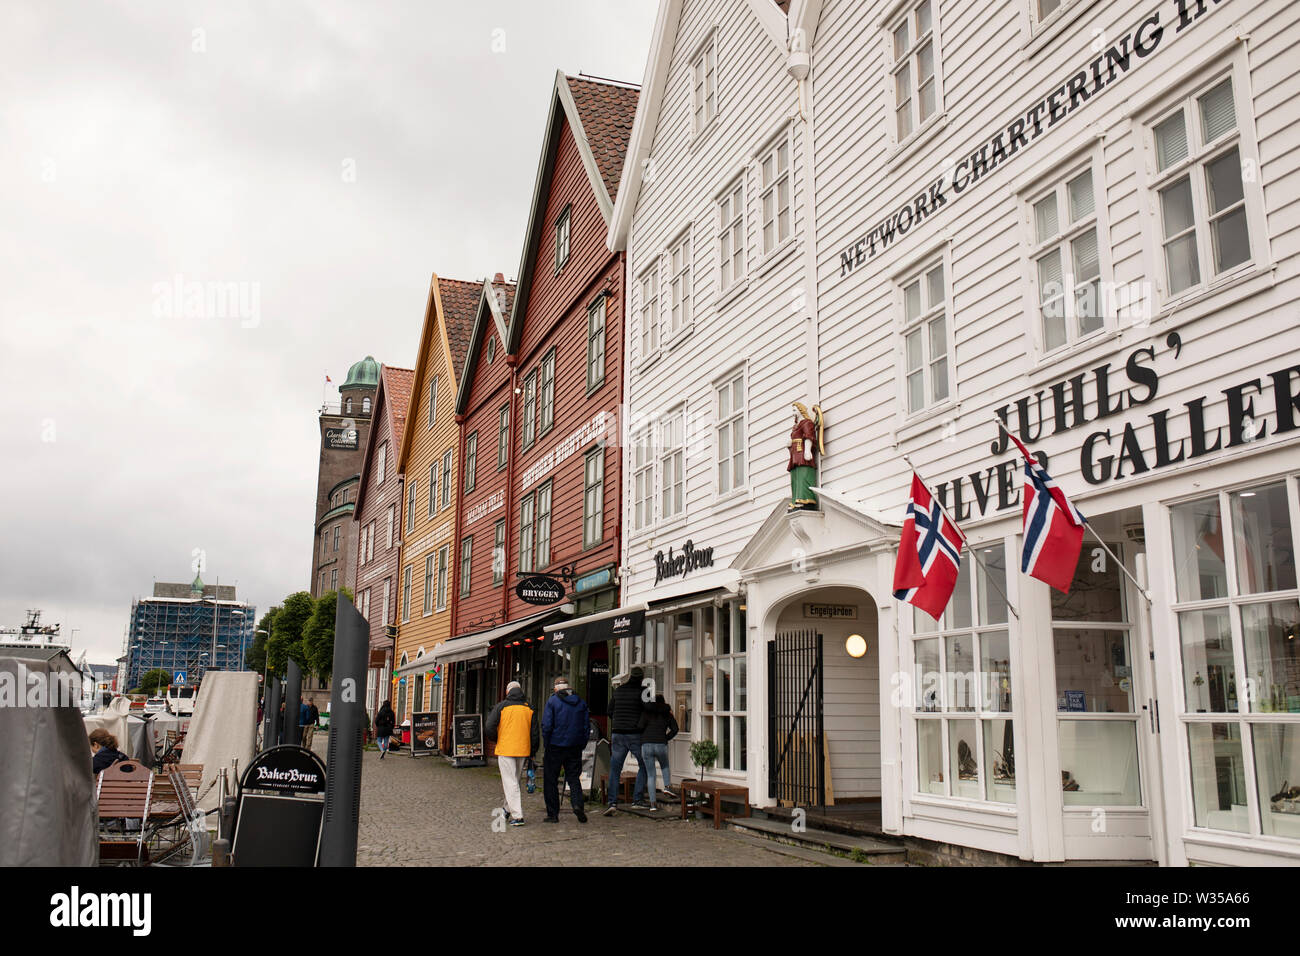 Kommuner stemning Perversion Juhls' Silver Gallery jewelry store and other shops line the famous Bryggen  district along the waterfront in Bergen, Norway Stock Photo - Alamy